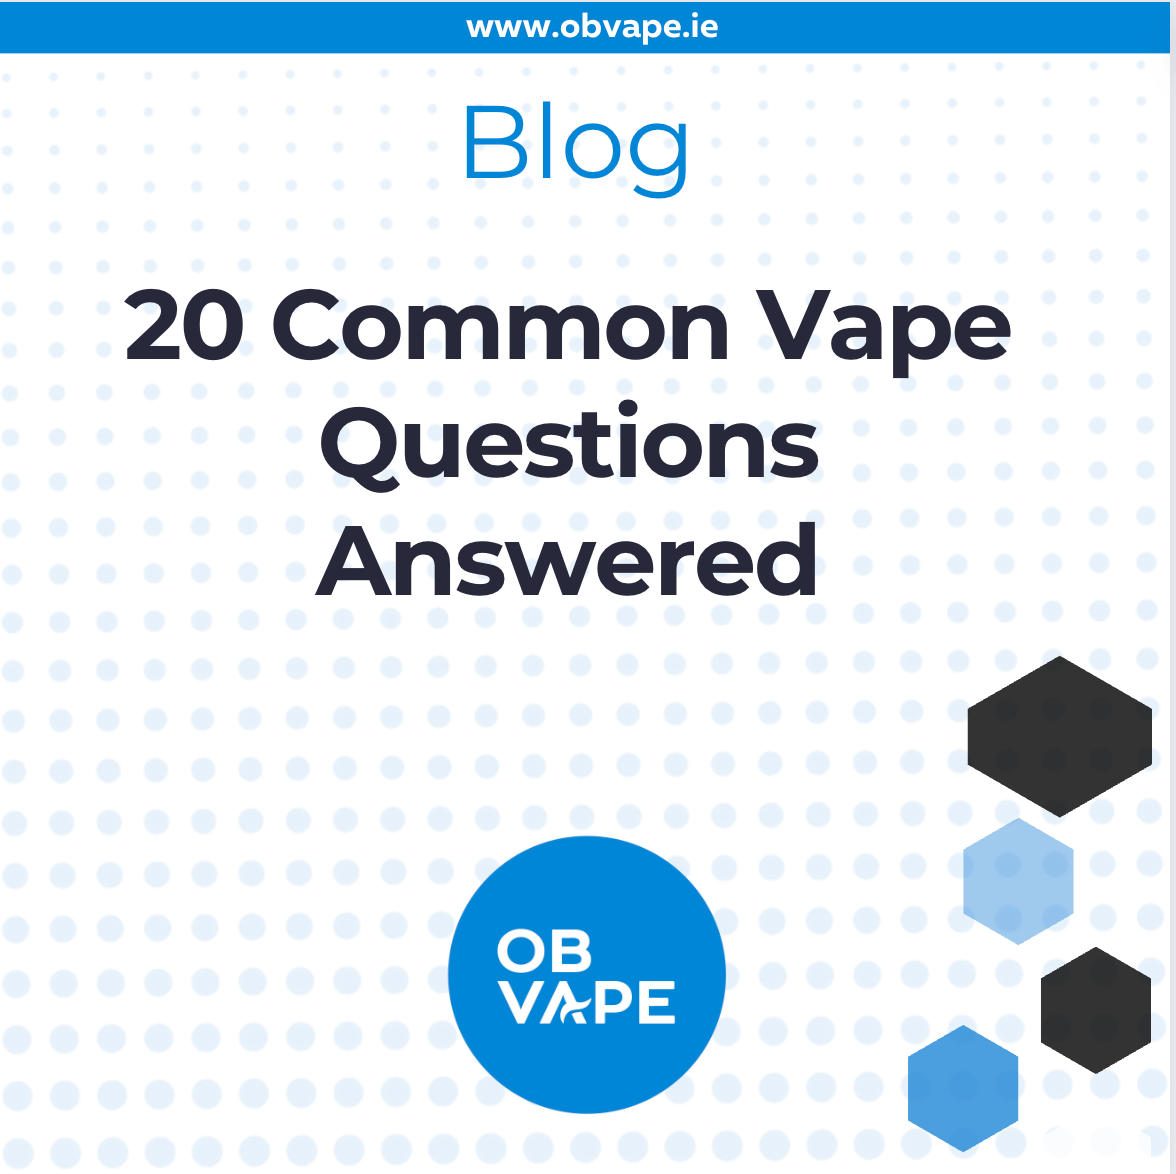 20 Common Vape Questions Answered